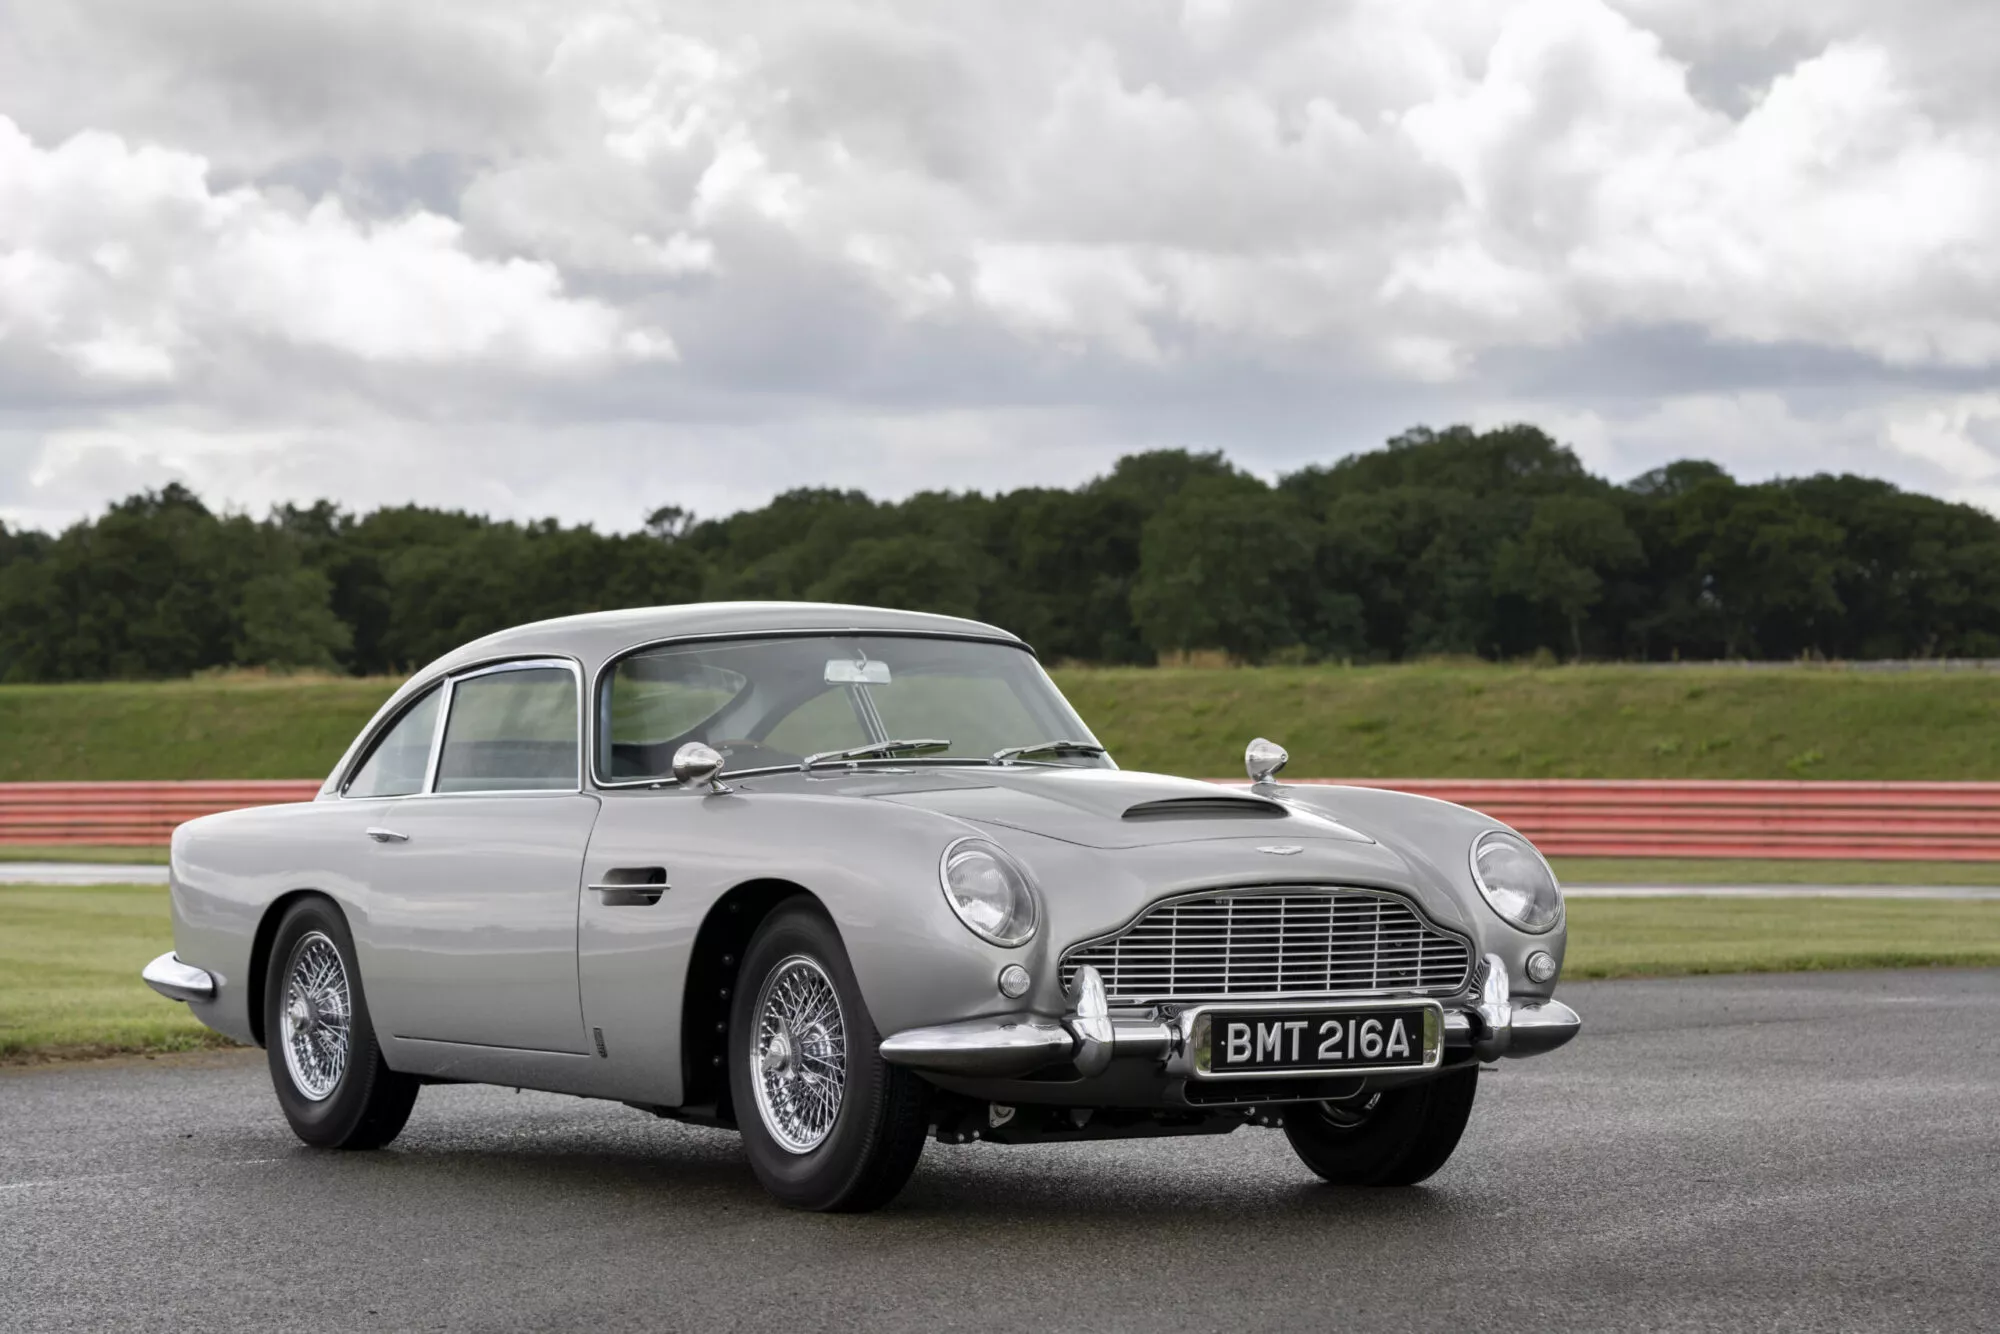 The Aston Martin DB5: History, Models, Differences